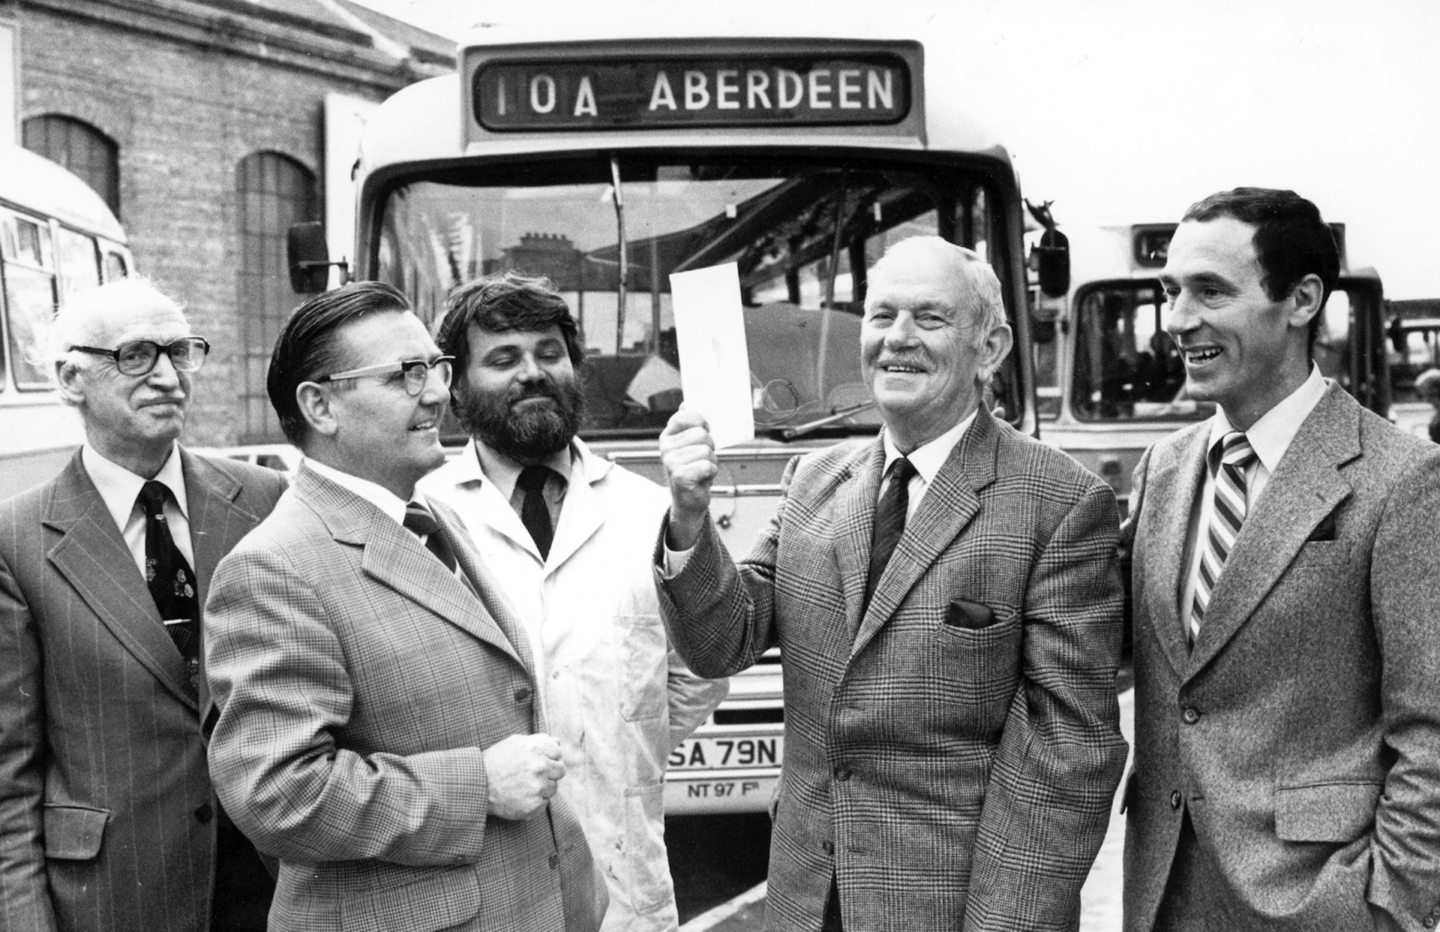 Aberdeen man William Anderson receives a cheque to mark his retirement after 41 years' service with William Alexander and Sons (Northern) Ltd in 1979.